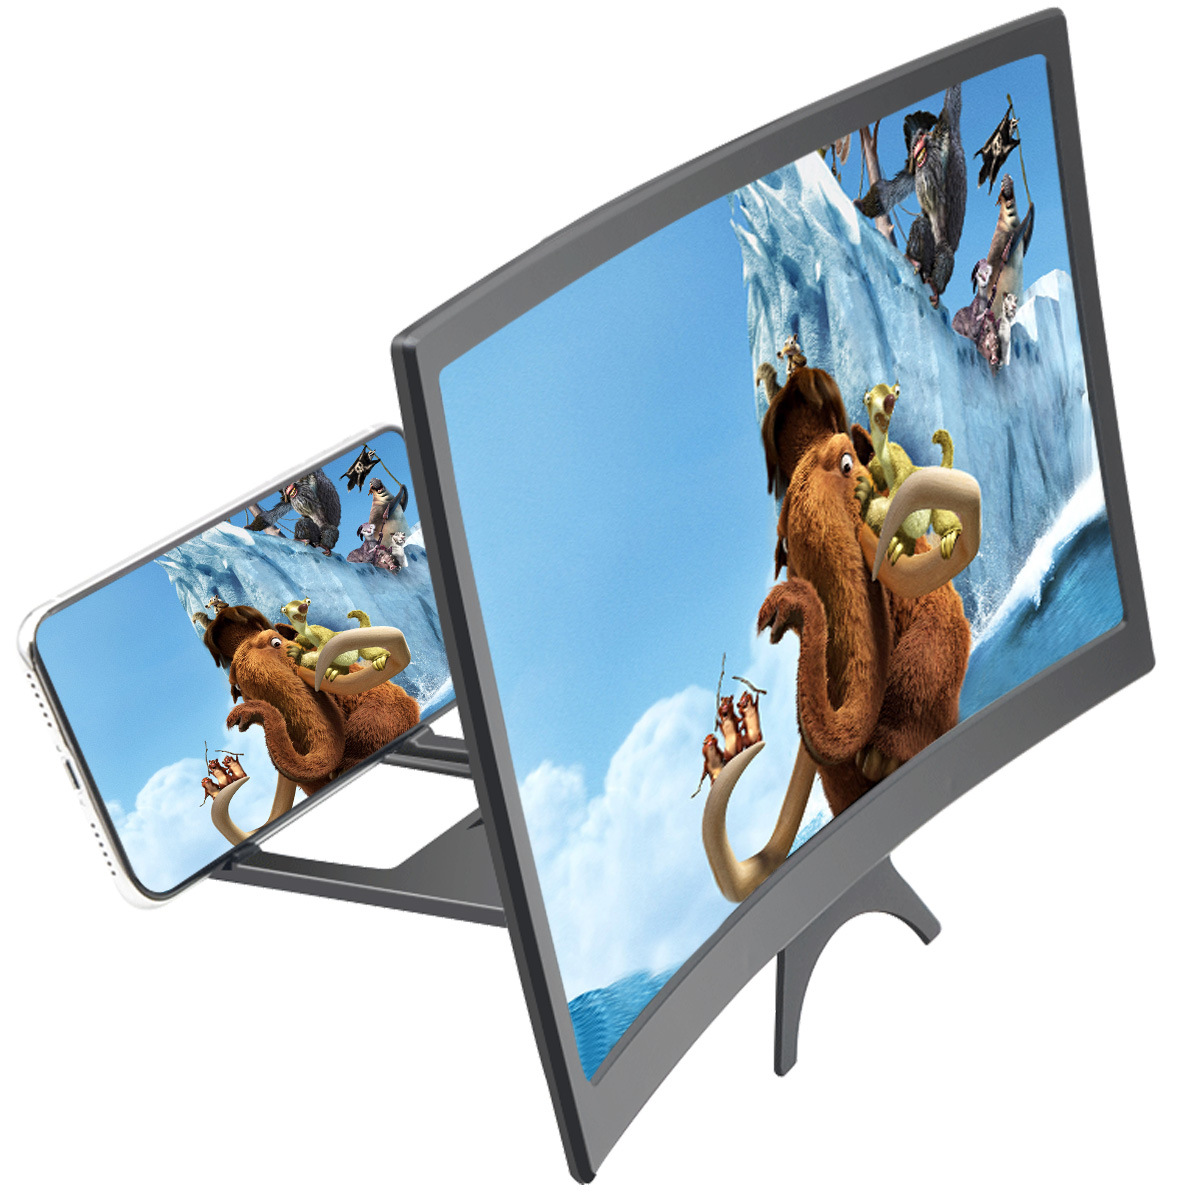 

12 Inch Curved 3D HD Phone Screen Magnifier Movie Video Amplifier for Smart Phones Below 6.5 Inch for iPhone for Samsung